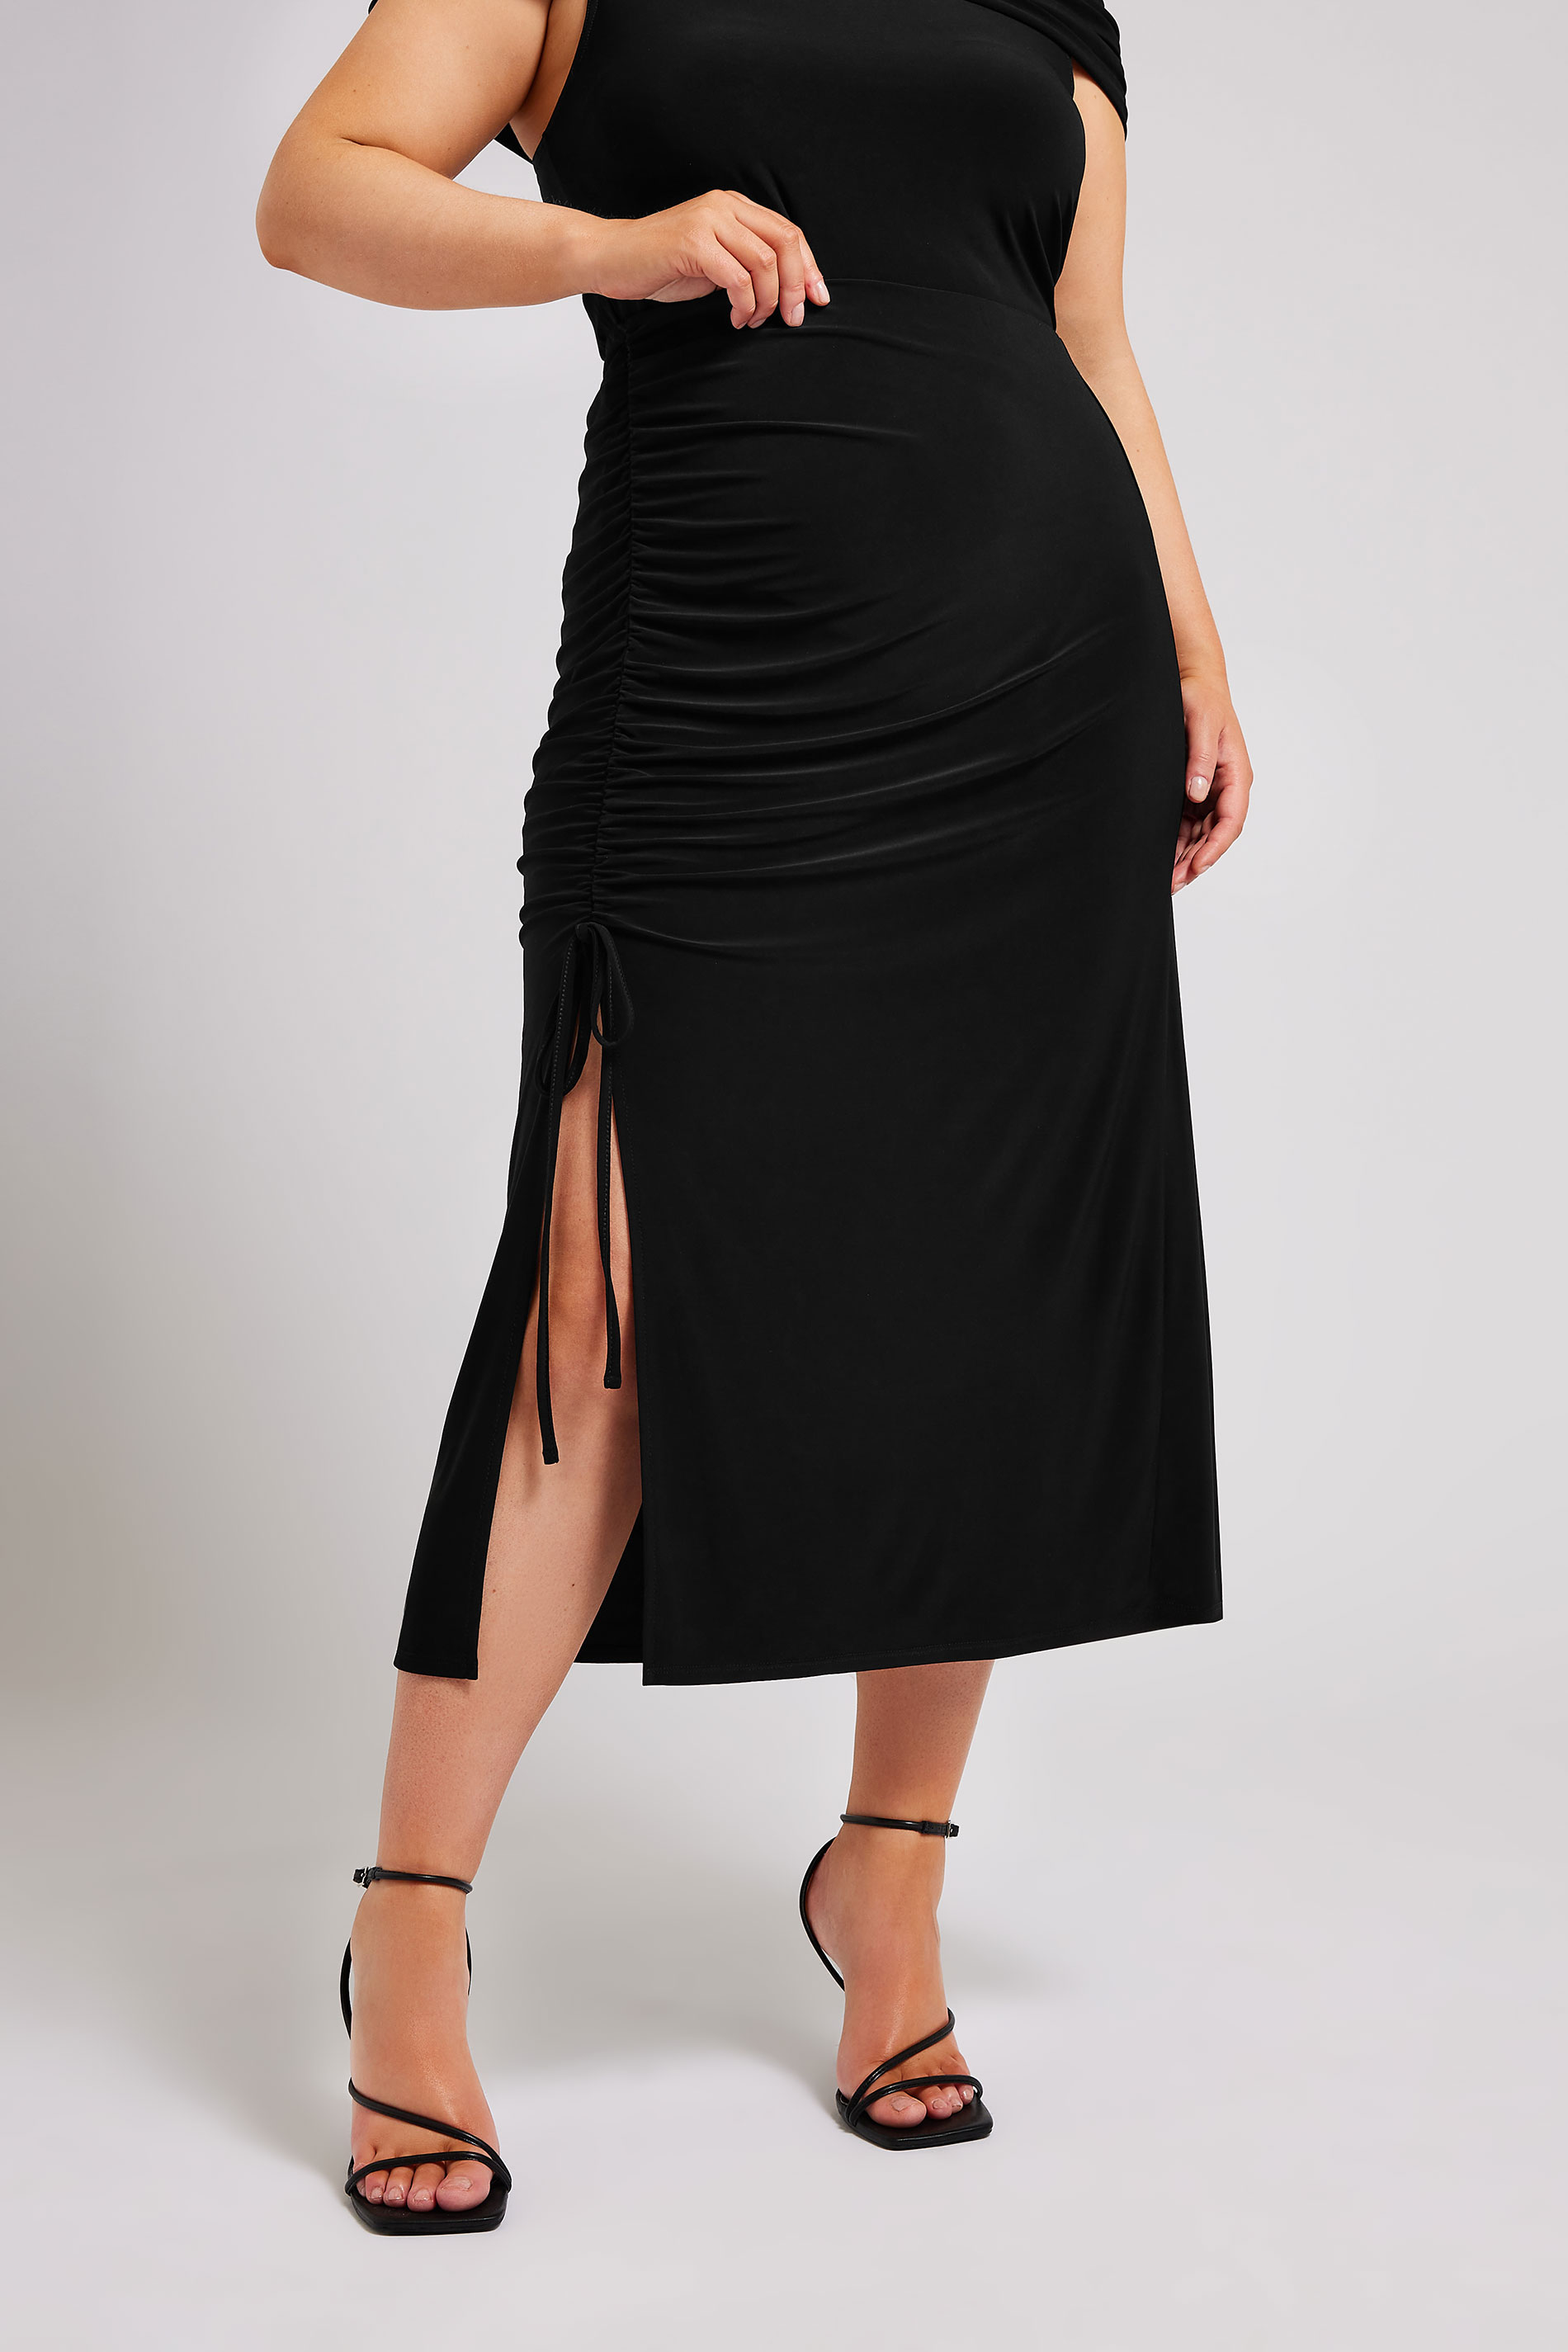 YOURS LONDON Plus Size Black Ruched Midaxi Skirt | Yours Clothing 1